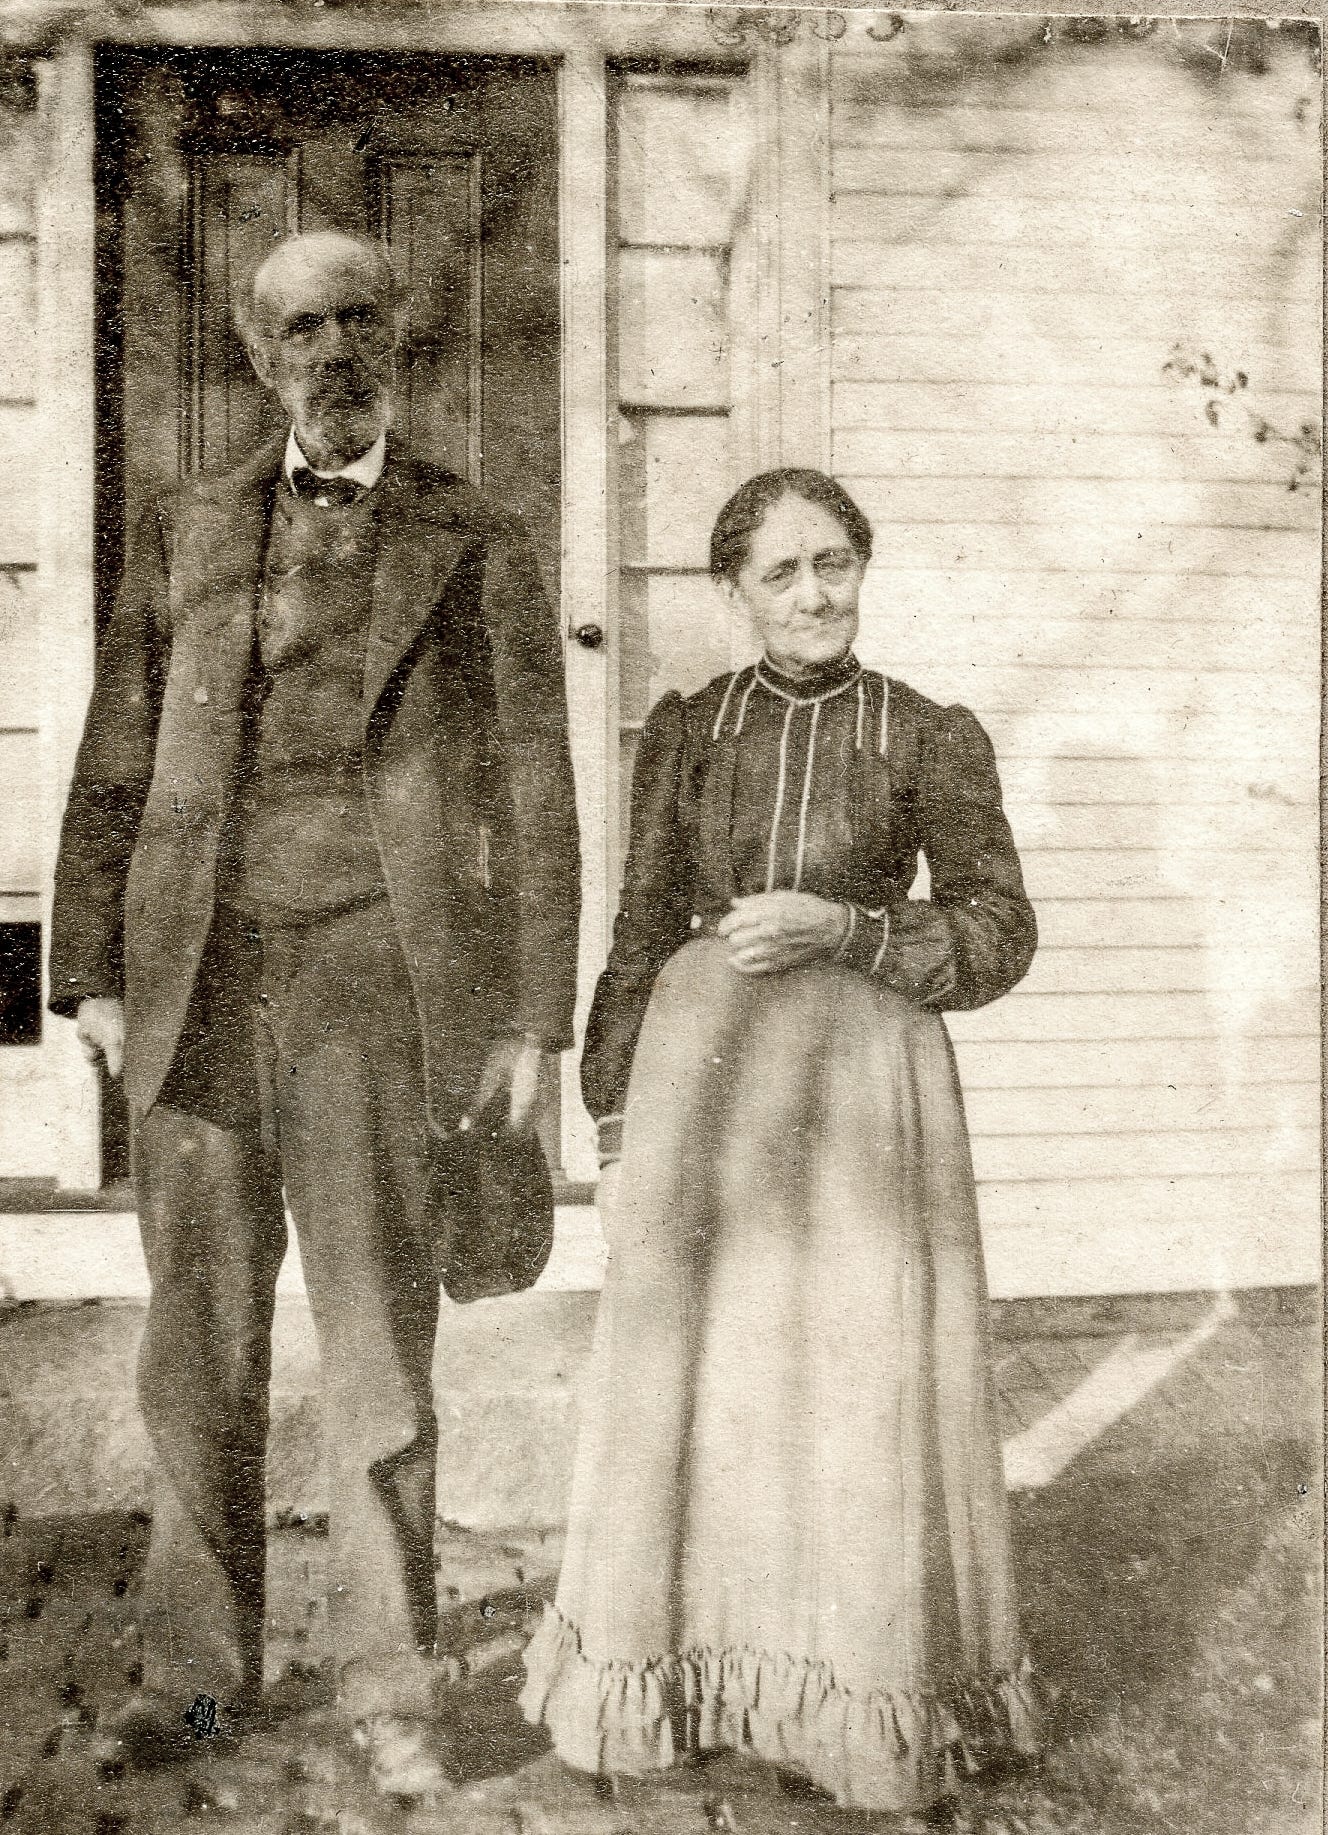 Historic photo of a man and woman from New Ipswich, NH